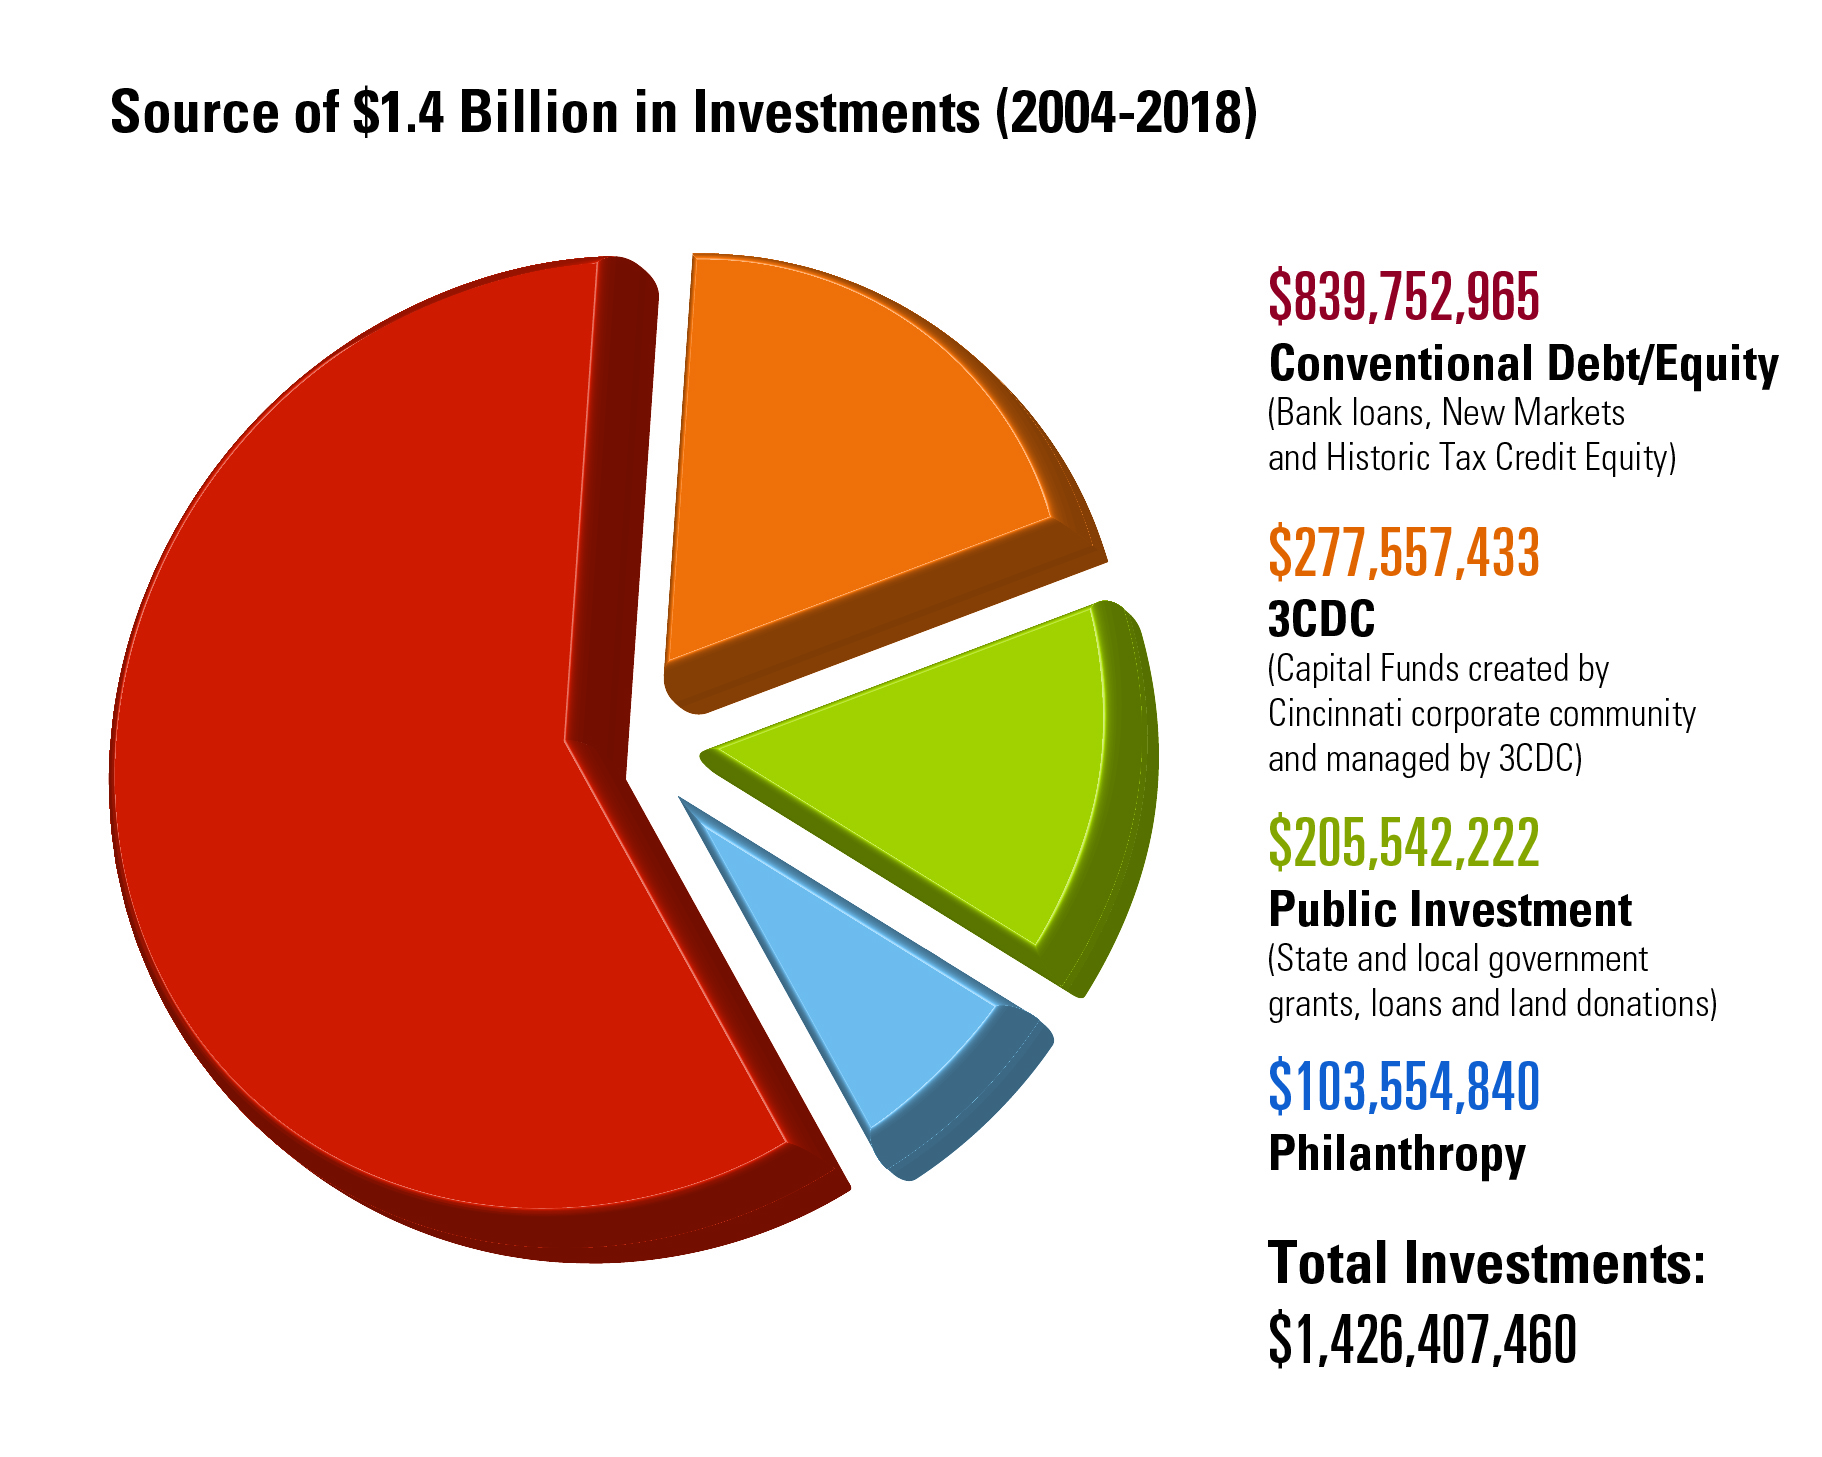 Sources of 3CDC investments